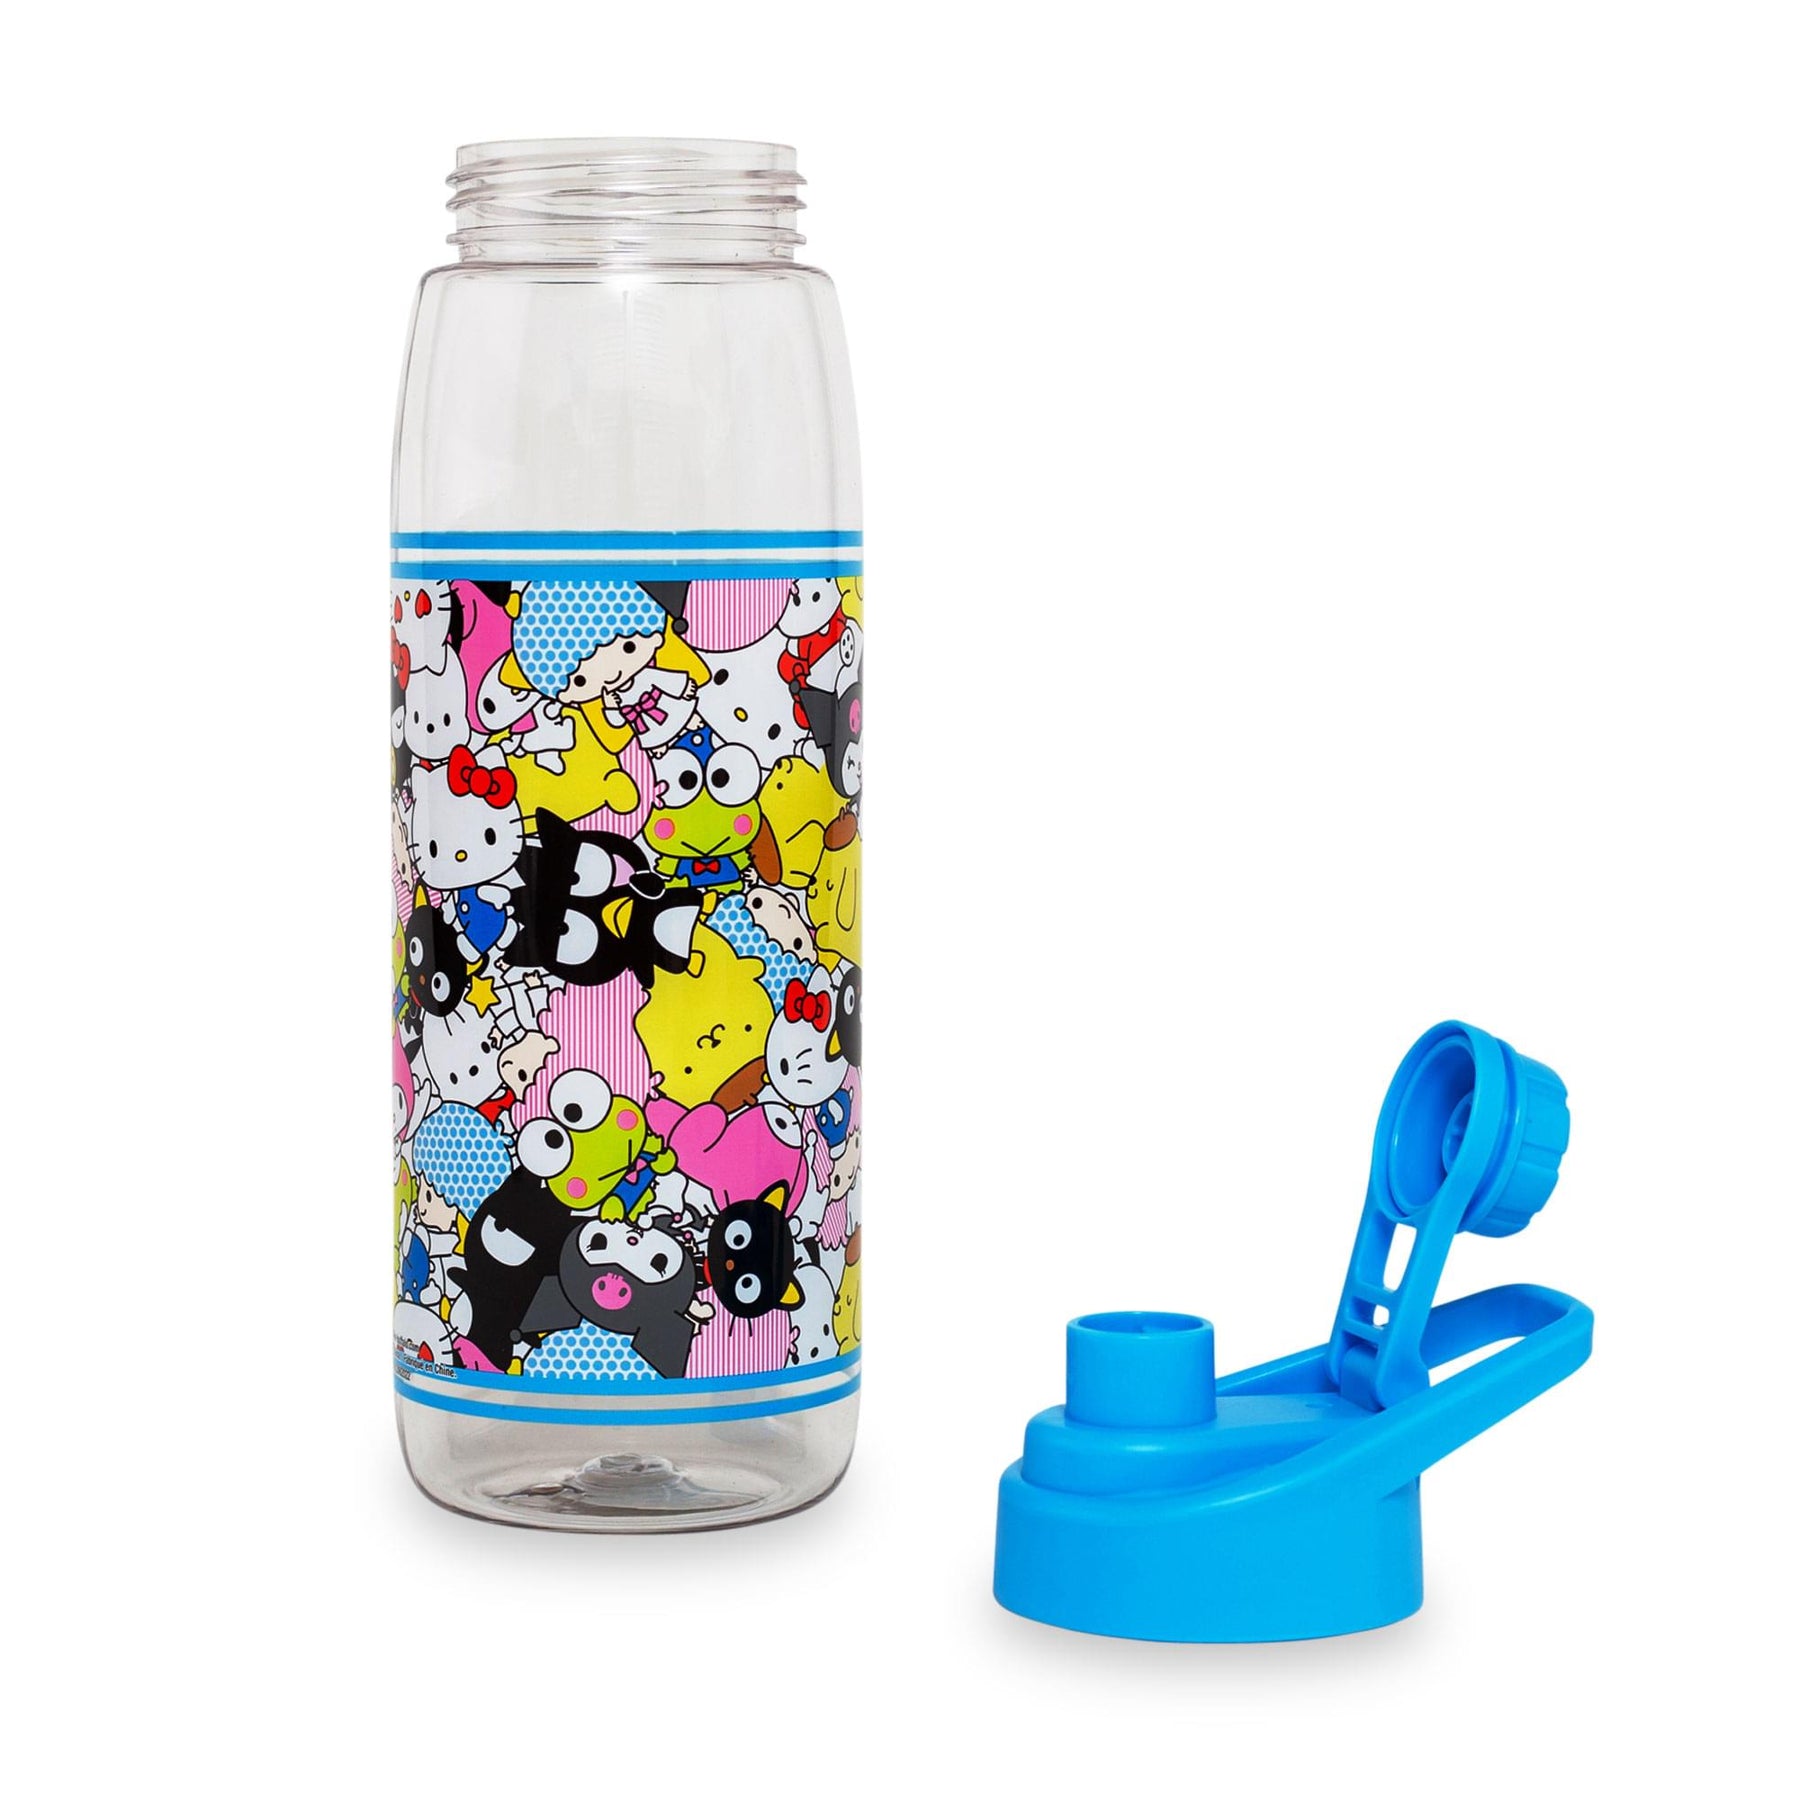 Sanrio Hello Kitty and Friends Plastic Water Bottle With Screw-Top Lid